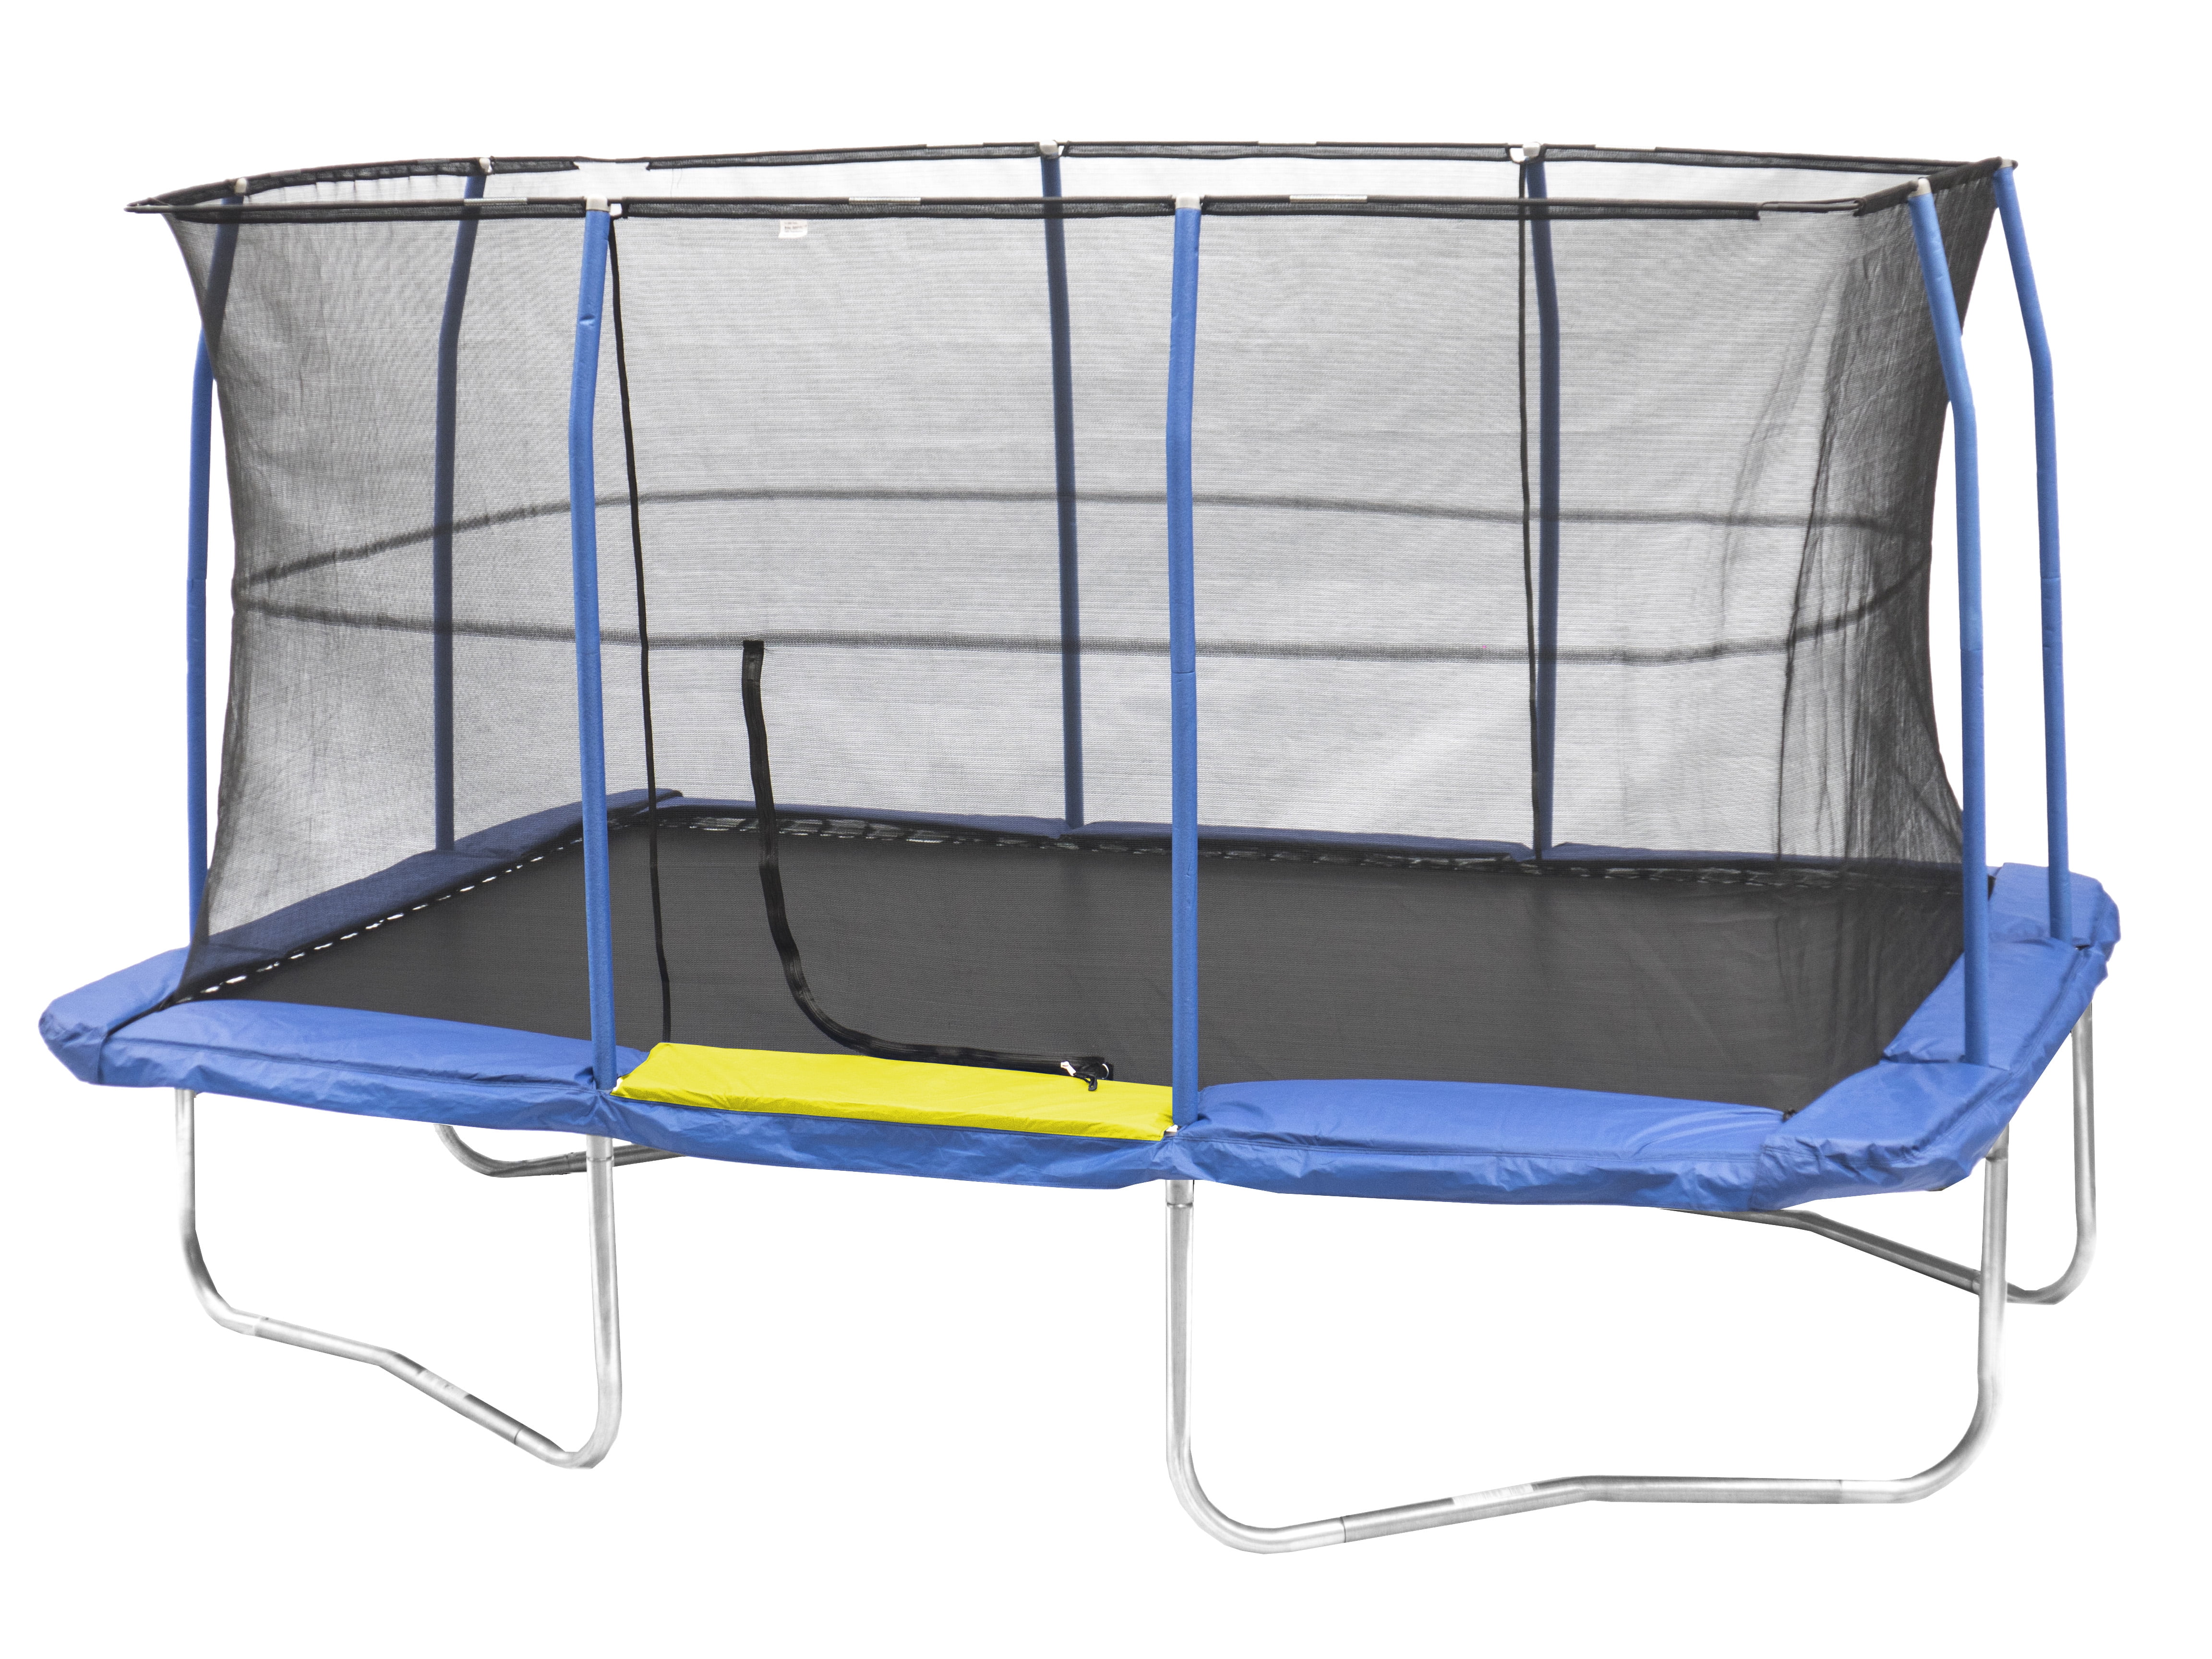 Jumpking Rectangle 10&amp;#39; x 14&amp;#39; Trampoline, with Enclosure, Blue/Yellow (Box 1 of 3)